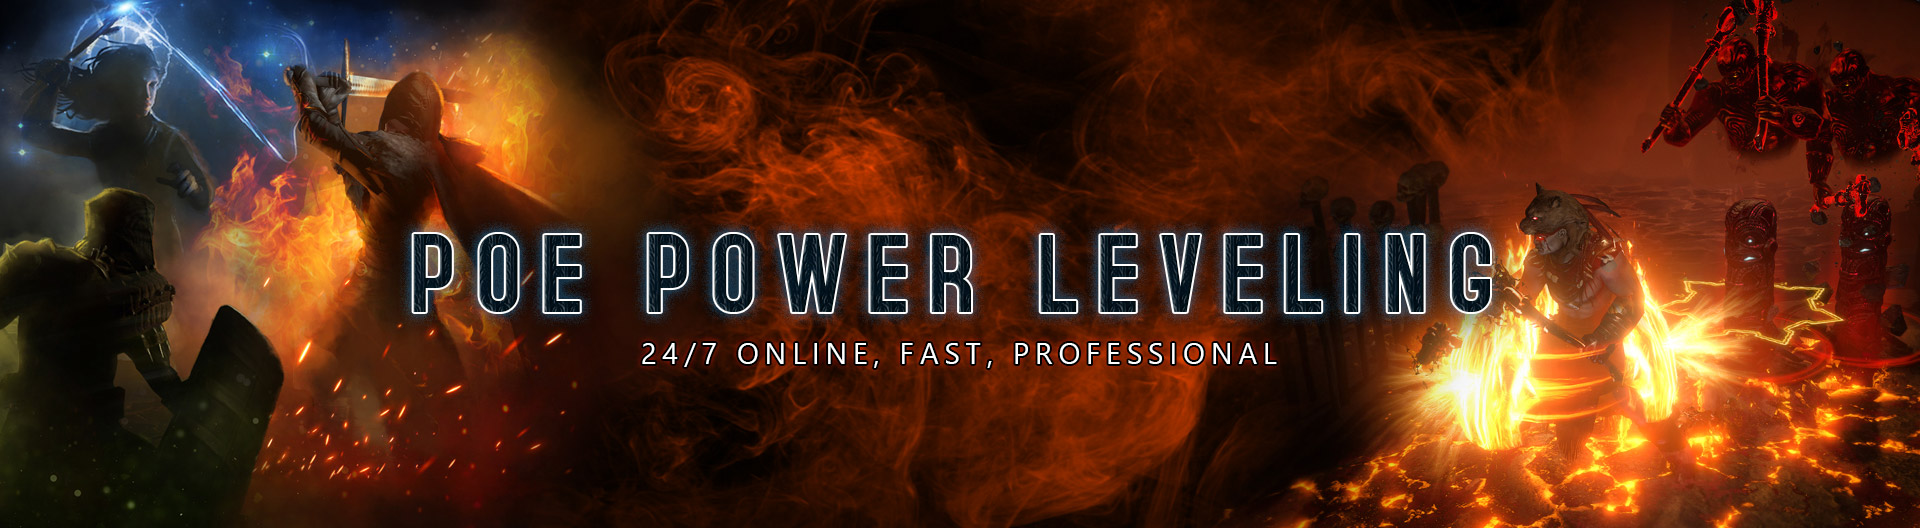 Buy PoE Power leveling in 3.15 Expedition